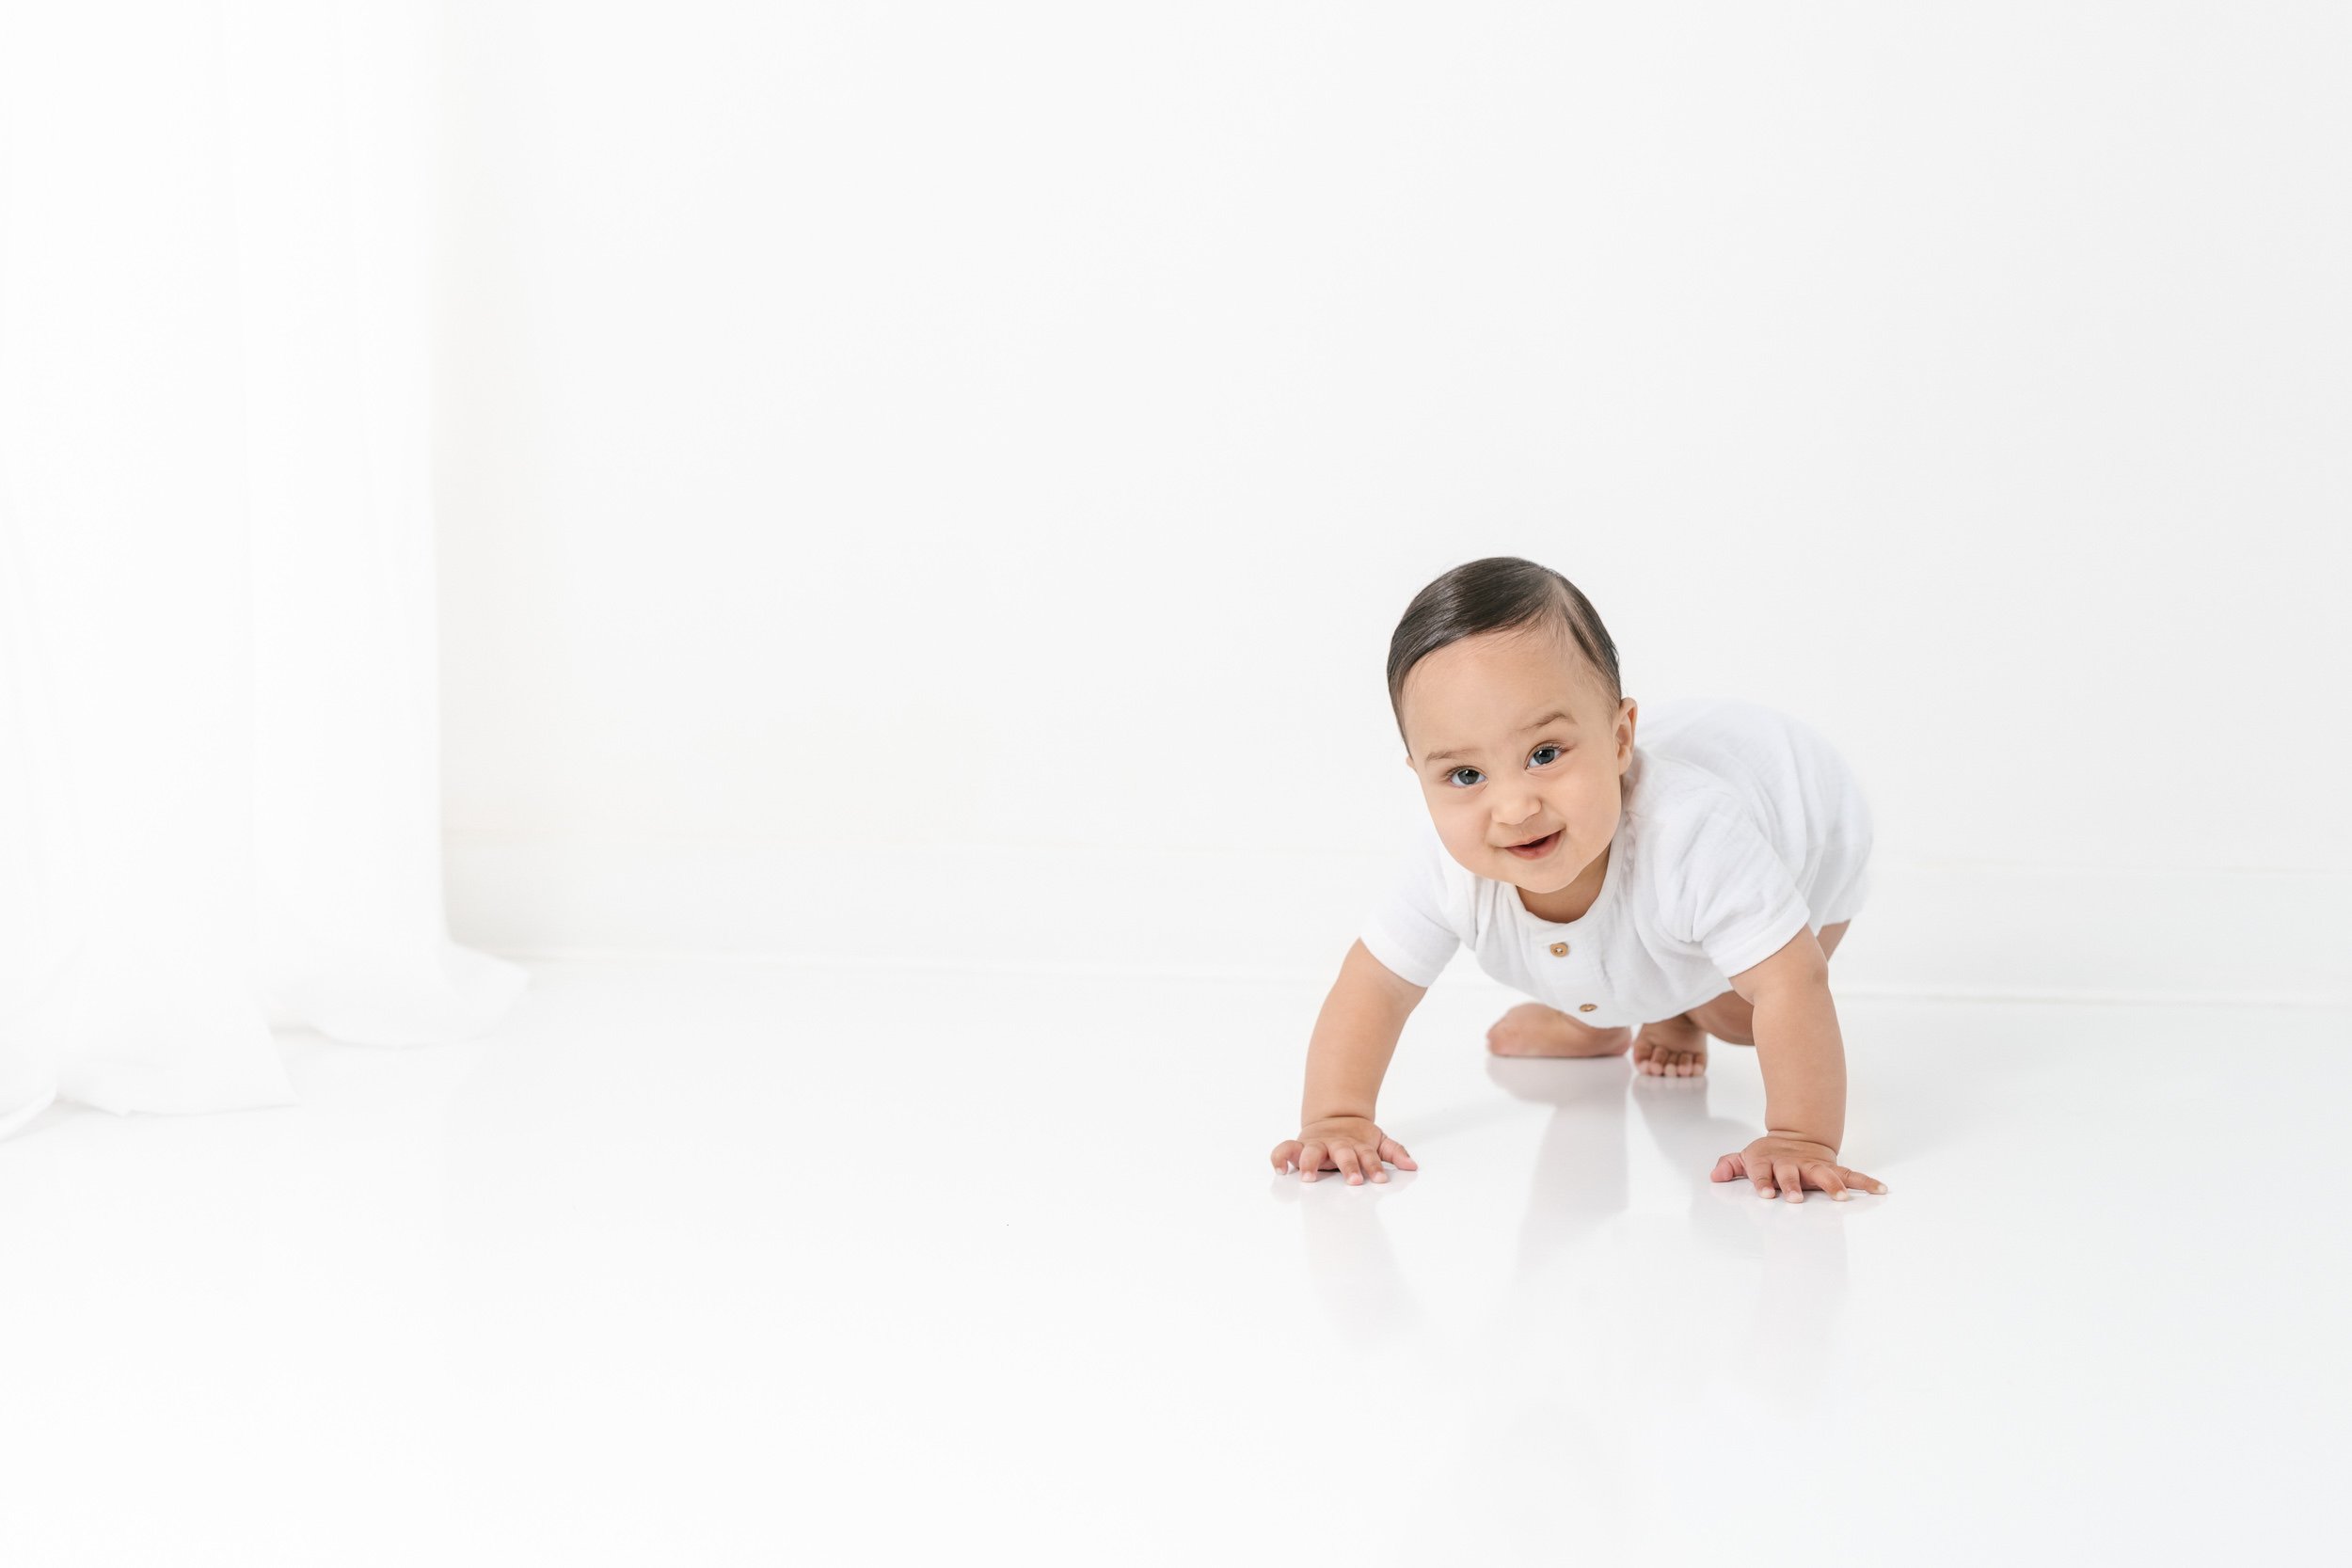  Nicole Hawkins's photography captures a baby boy crawling around a studio during a child portrait session. crawling baby boy baby in white outfit milestone portraits #NicoleHawkinsPhotography #NicolewHawkinsNewborns #NewJerseyNewborns #NewJerseyStud